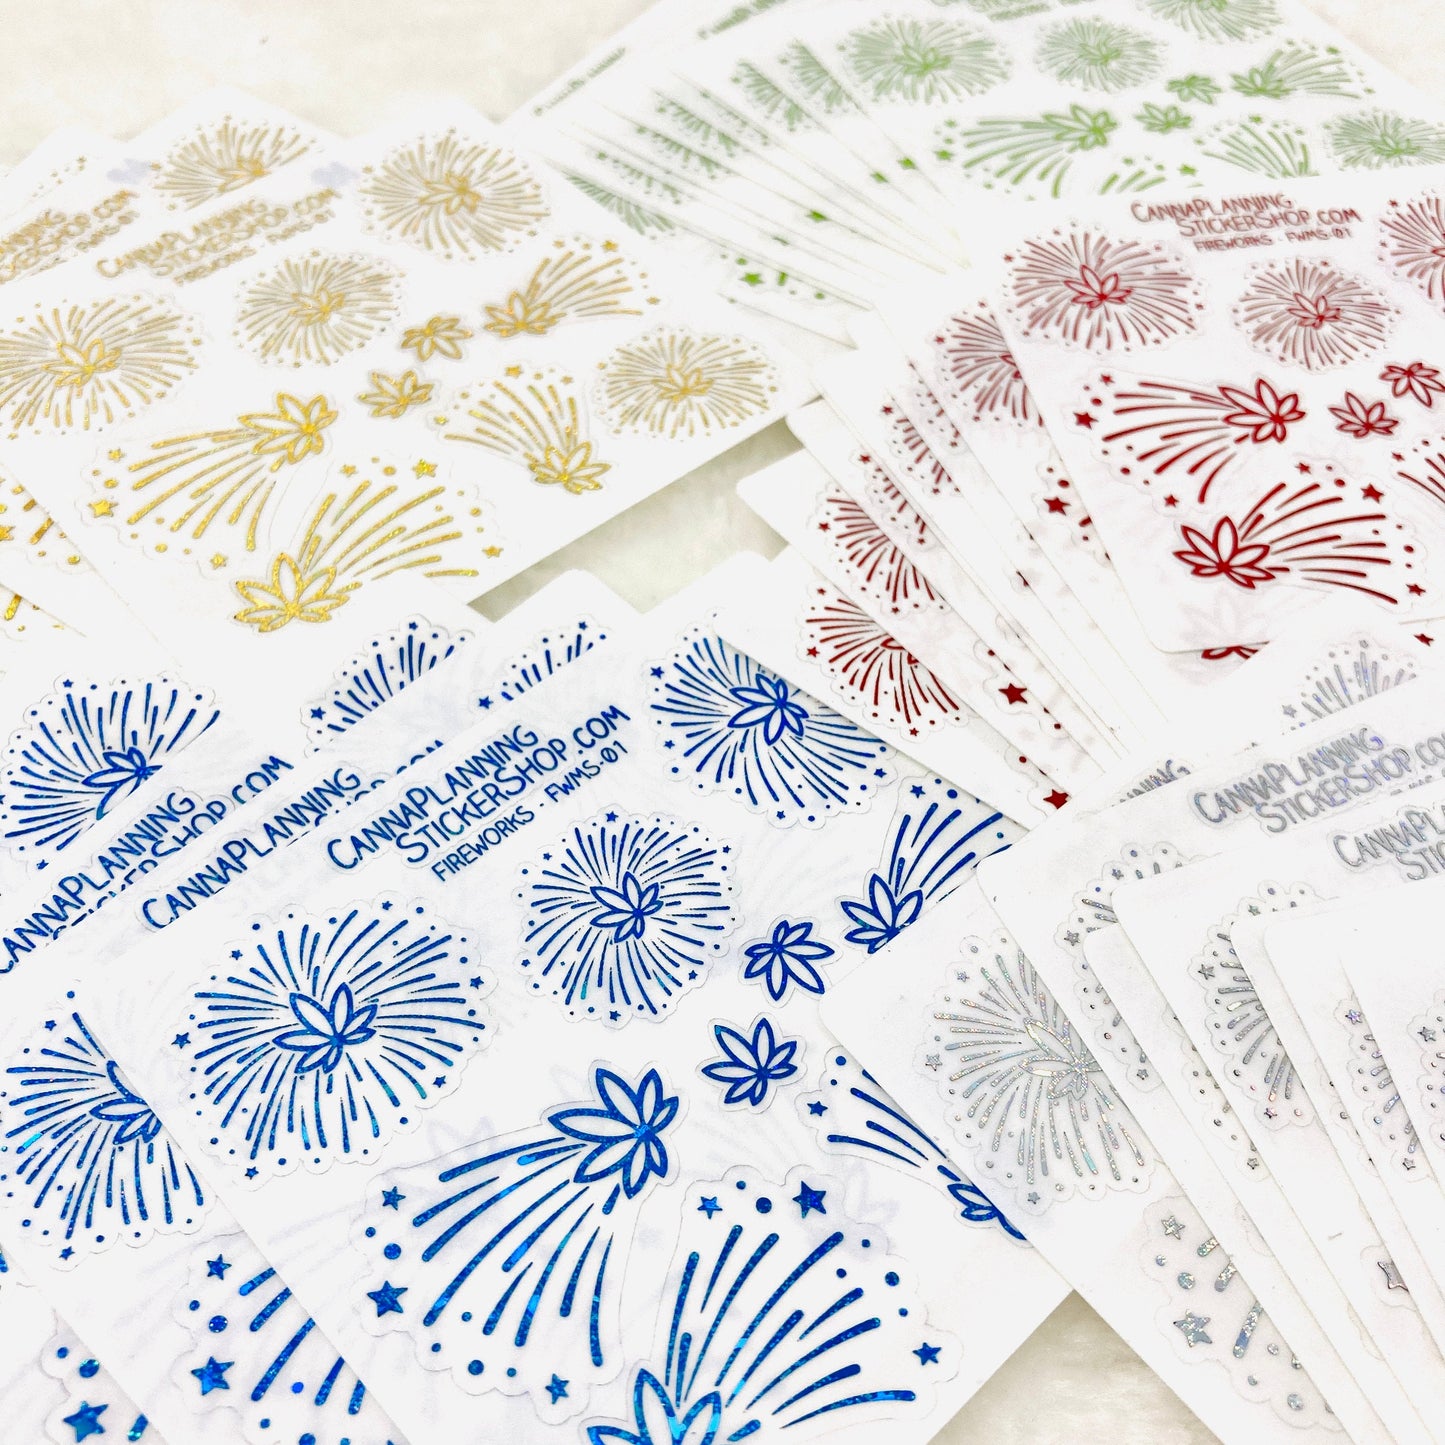 Clear Pot Leaf Planner Stickers *Retiring Product - final stock* –  CannaPlanning